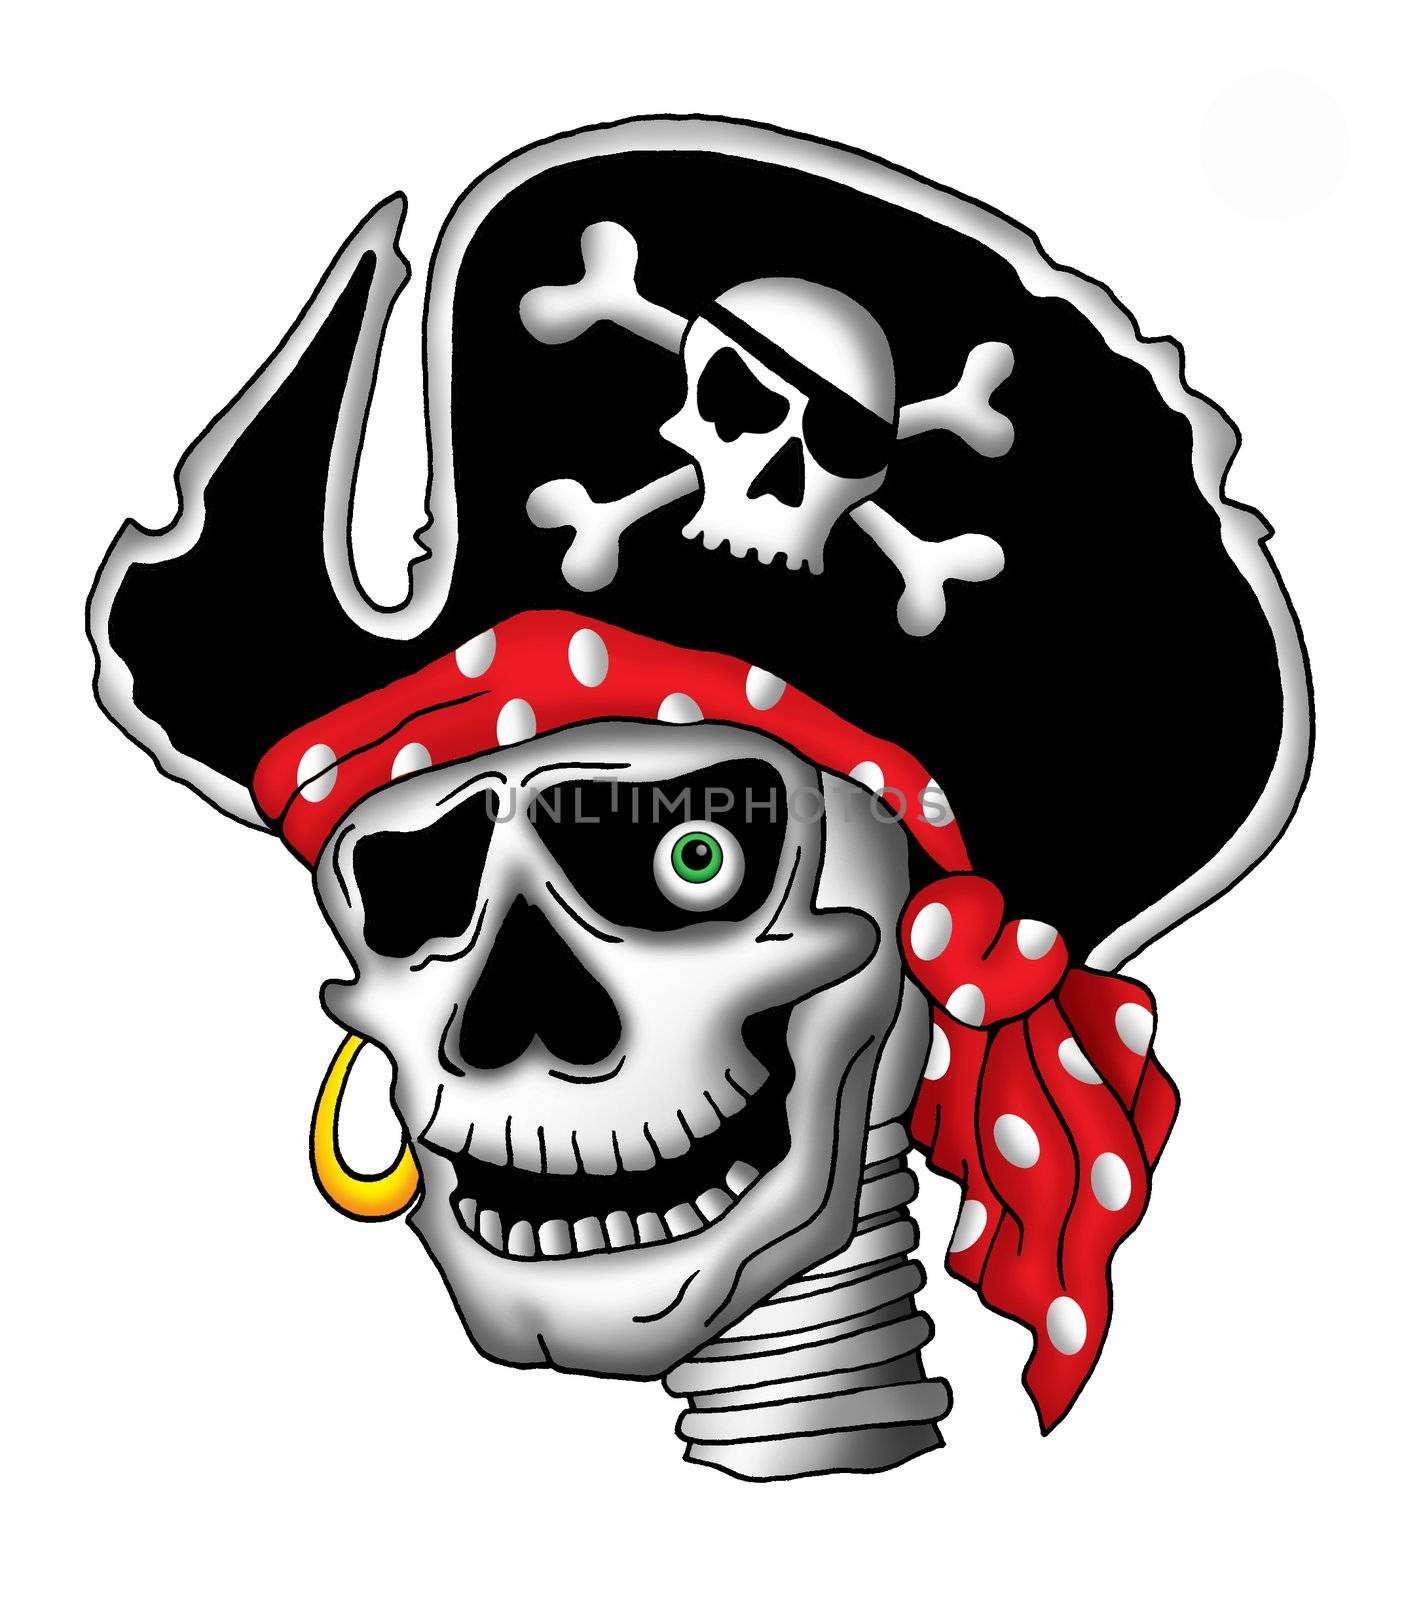 Pirate skull in hat by clairev